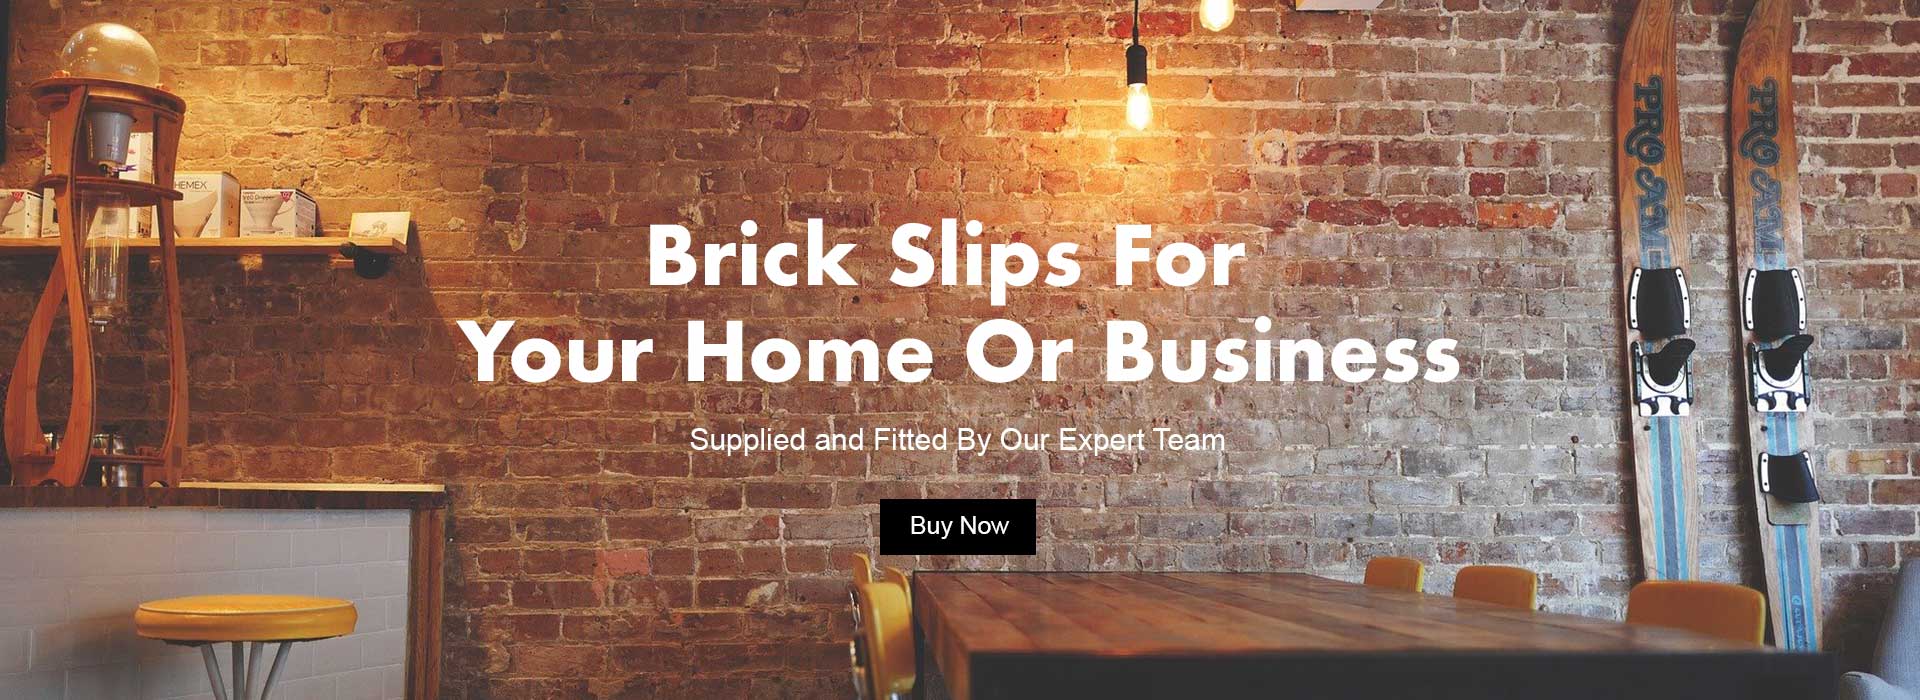 Brick Slips in Your Home